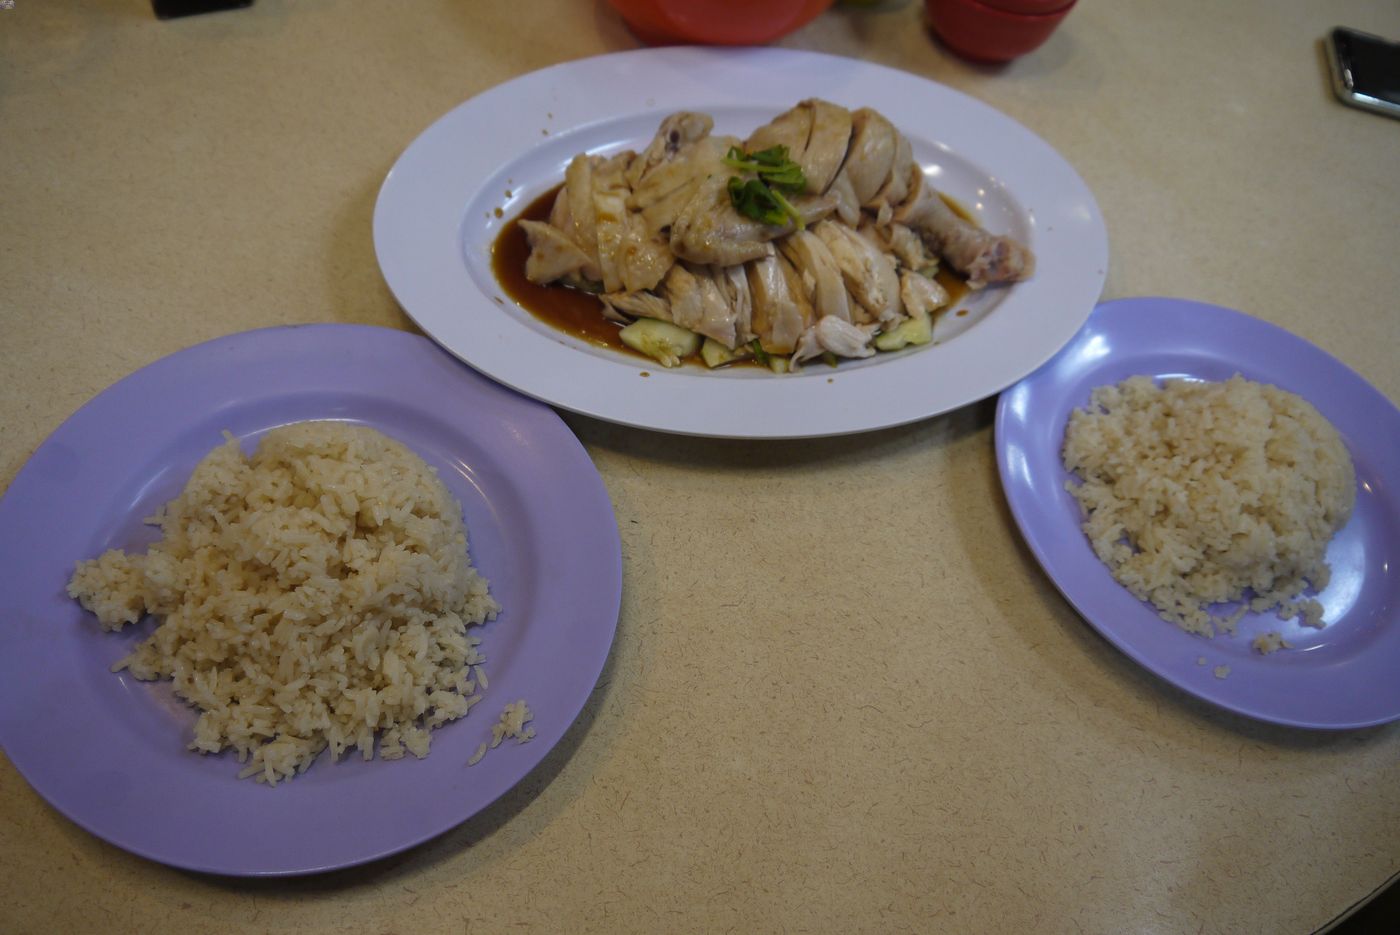 Servings of Hainanese chicken rice ready to be eaten. The preparation is so well-loved in Singapore that it is considered one of the Republic’s “national dishes”.